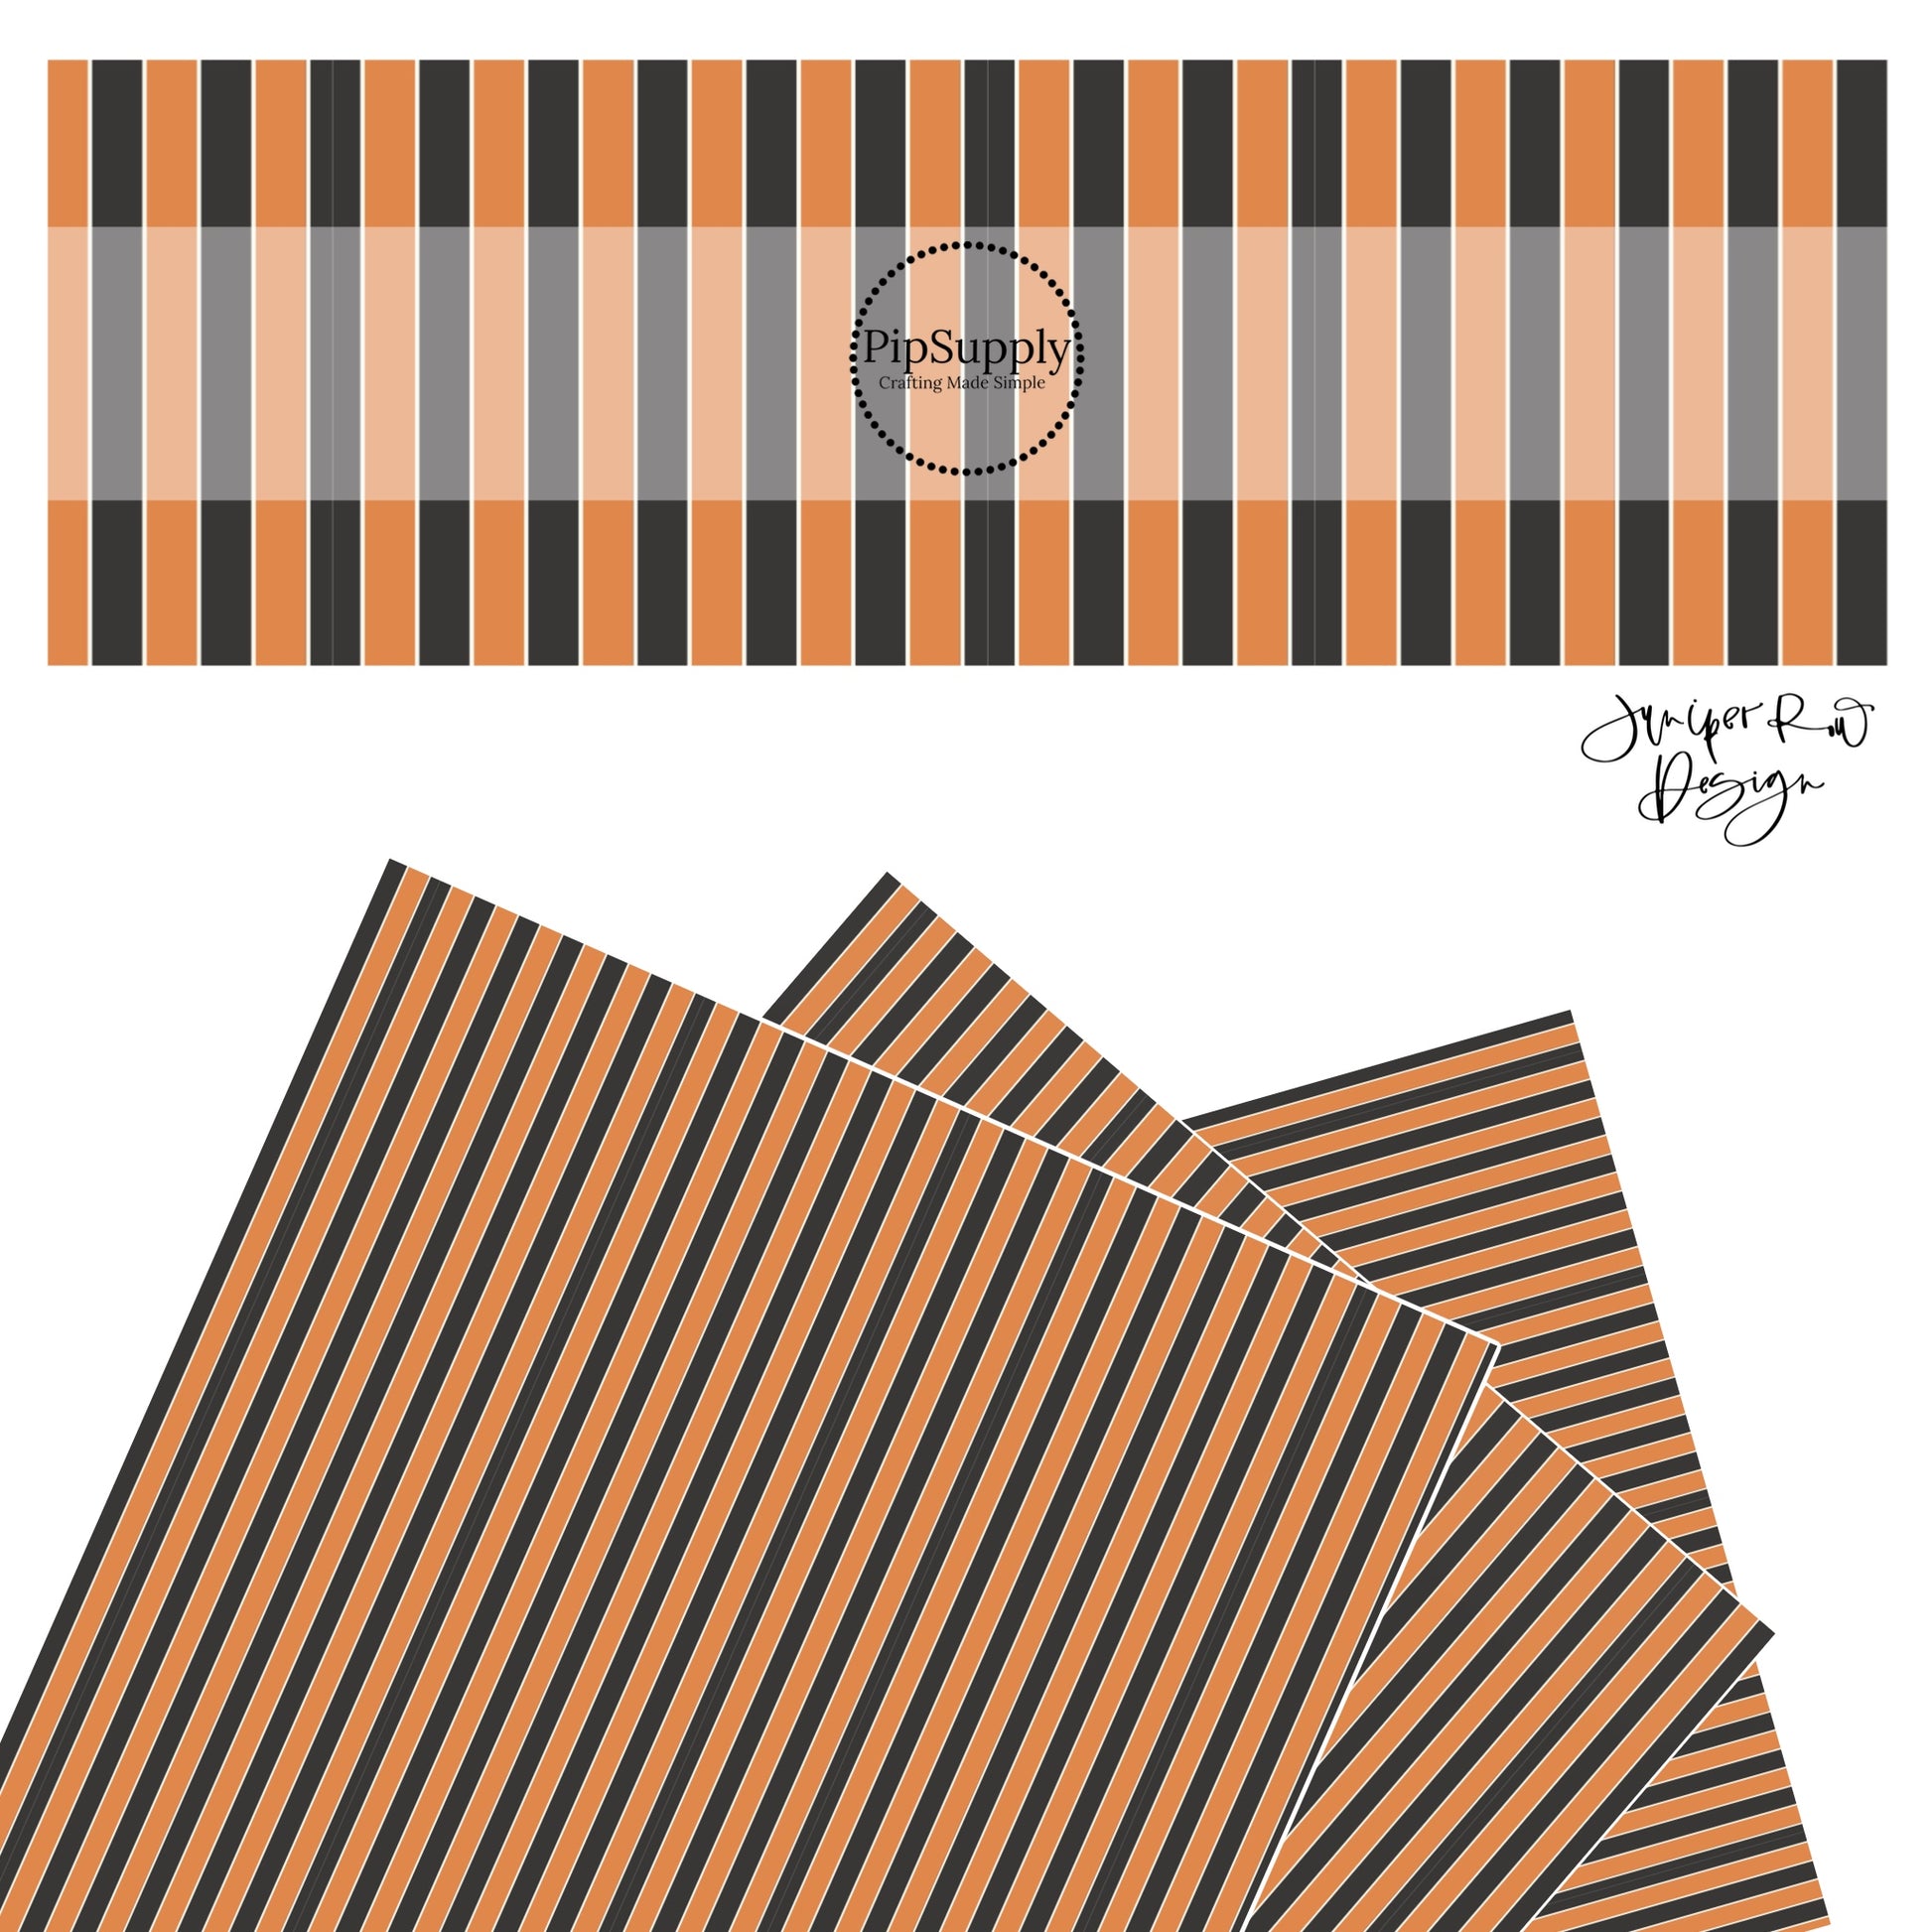 Thin white lines on thick orange and black stripe faux leather sheets